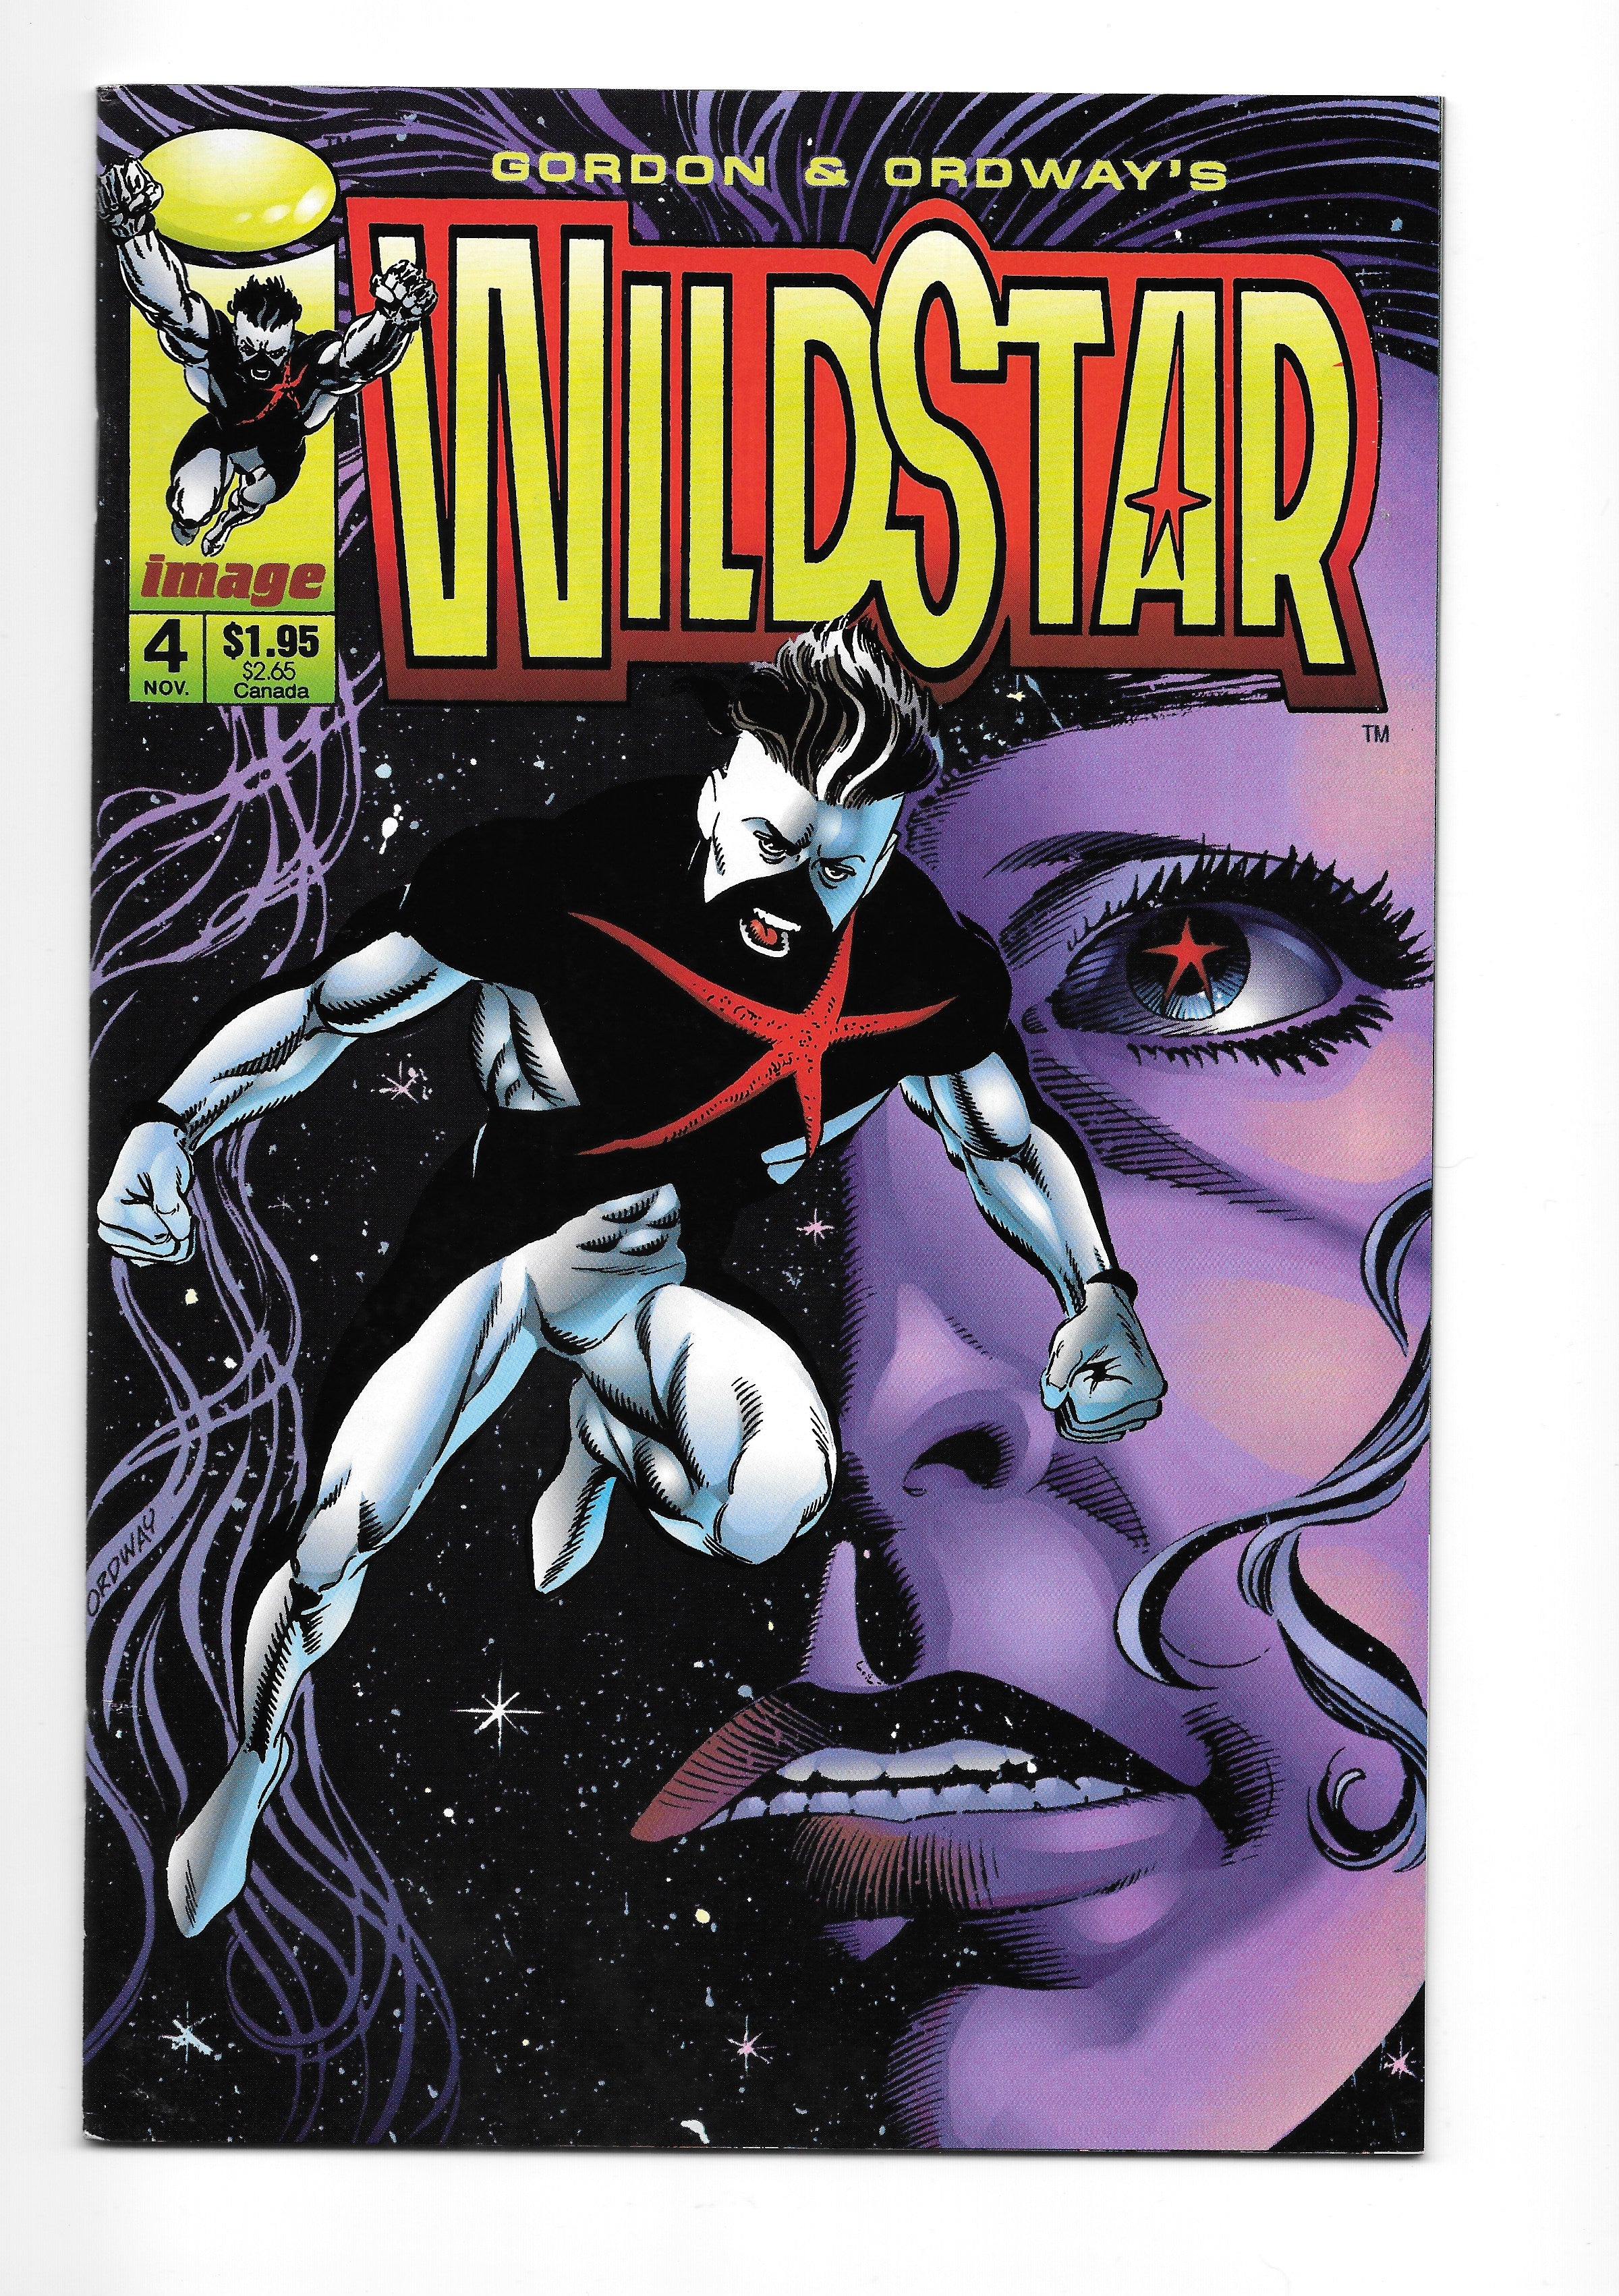 Photo of Wildstar: Sky Zero (1993)  Iss 4   Comic sold by Stronghold Collectibles